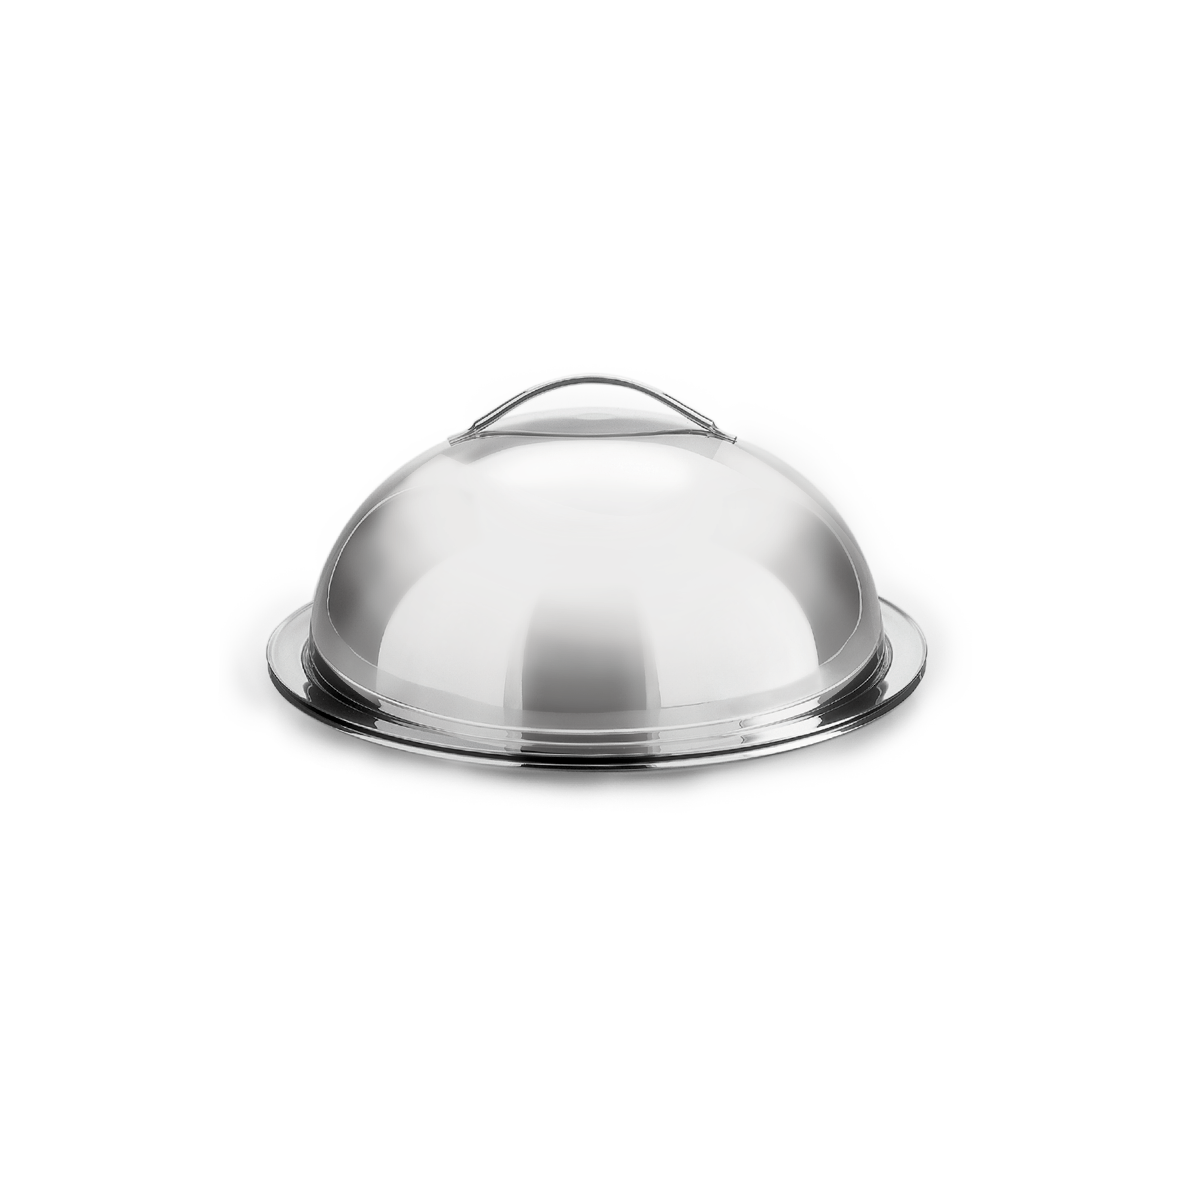 Stainless Steel Serving Platter & Dome 